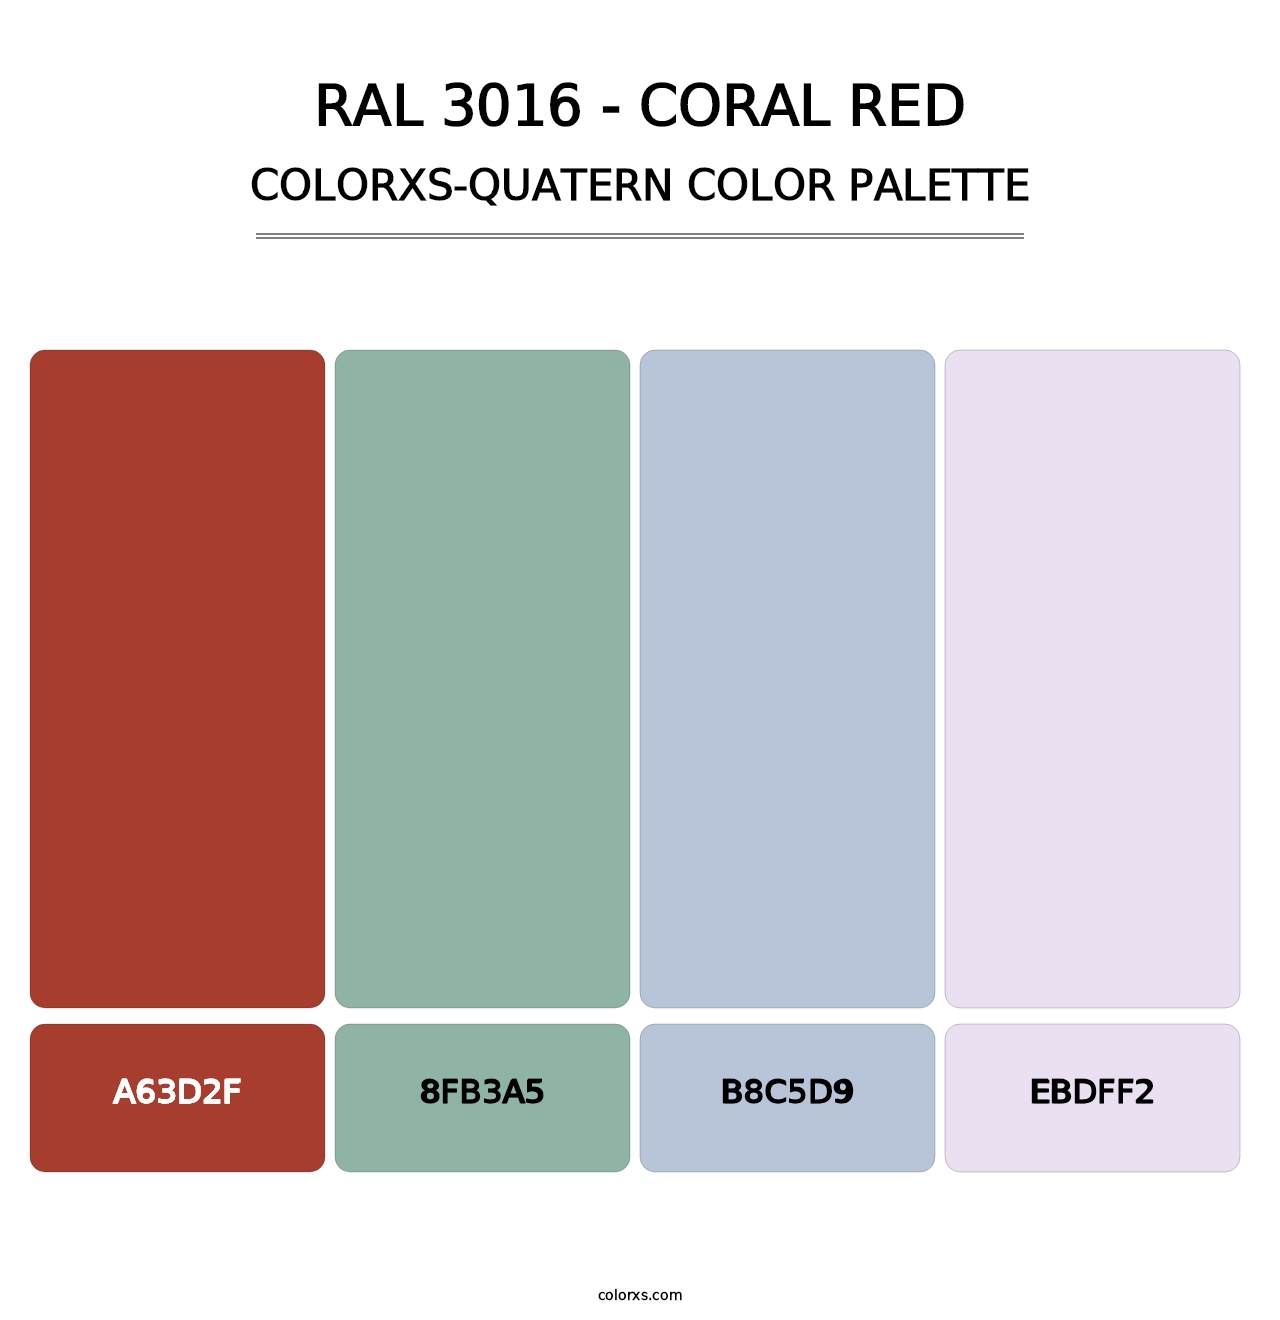 RAL 3016 - Coral Red - Colorxs Quatern Palette